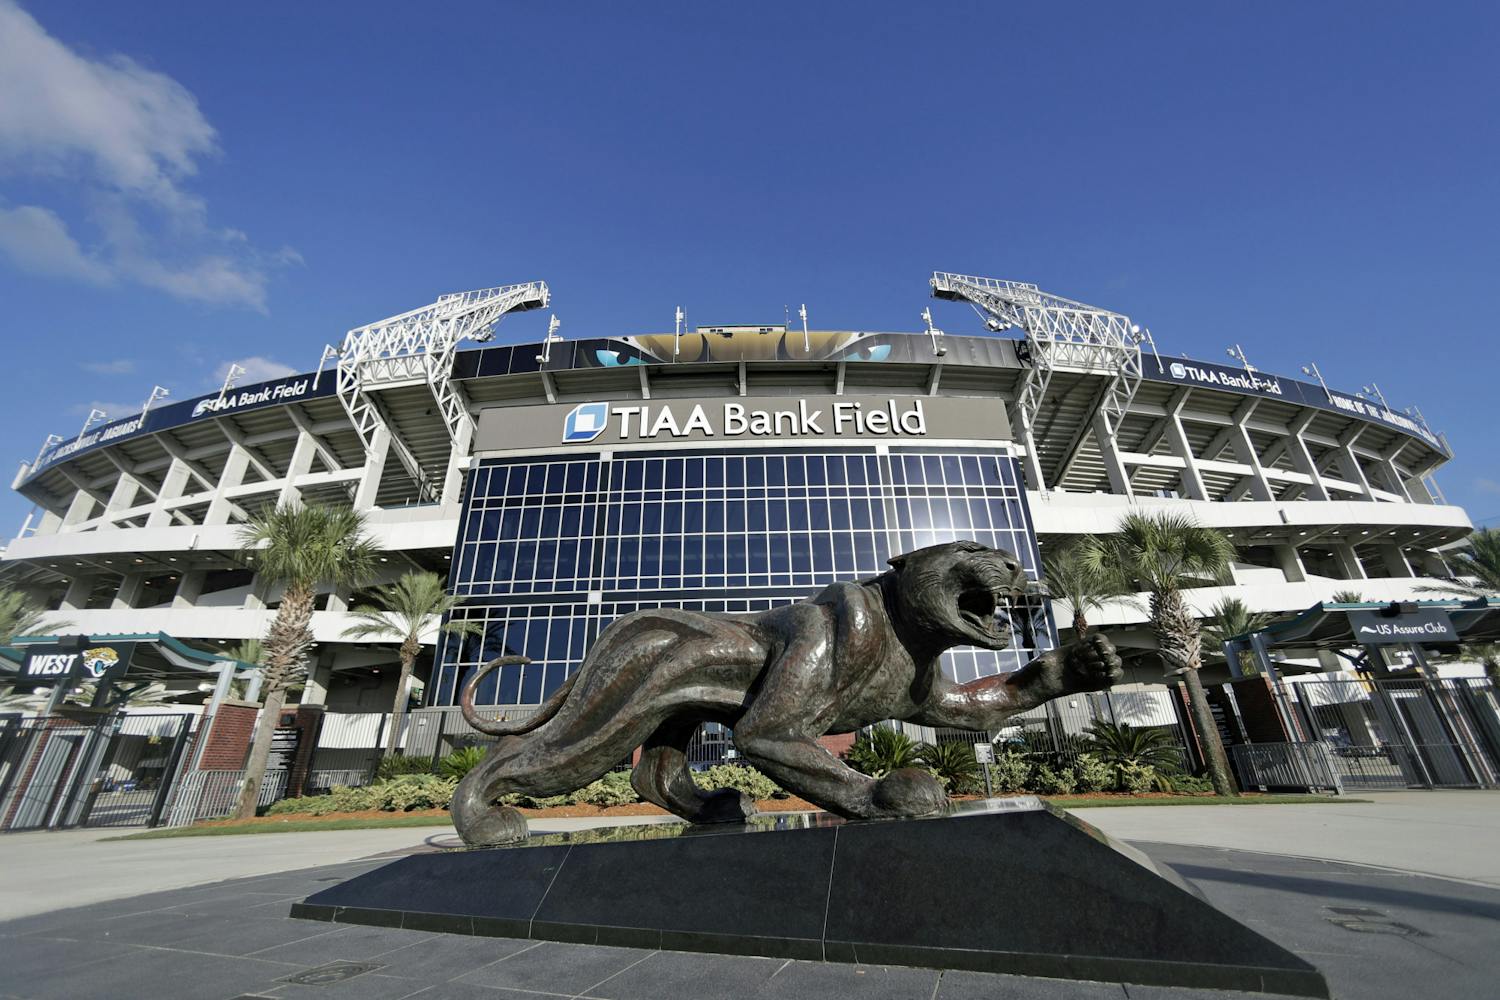 TIAA Bank Field, the home stadium of the NFL’s Jacksonville Jaguars, also serves as host for the annual Florida-Georgia game. (AP Photo/John Raoux)